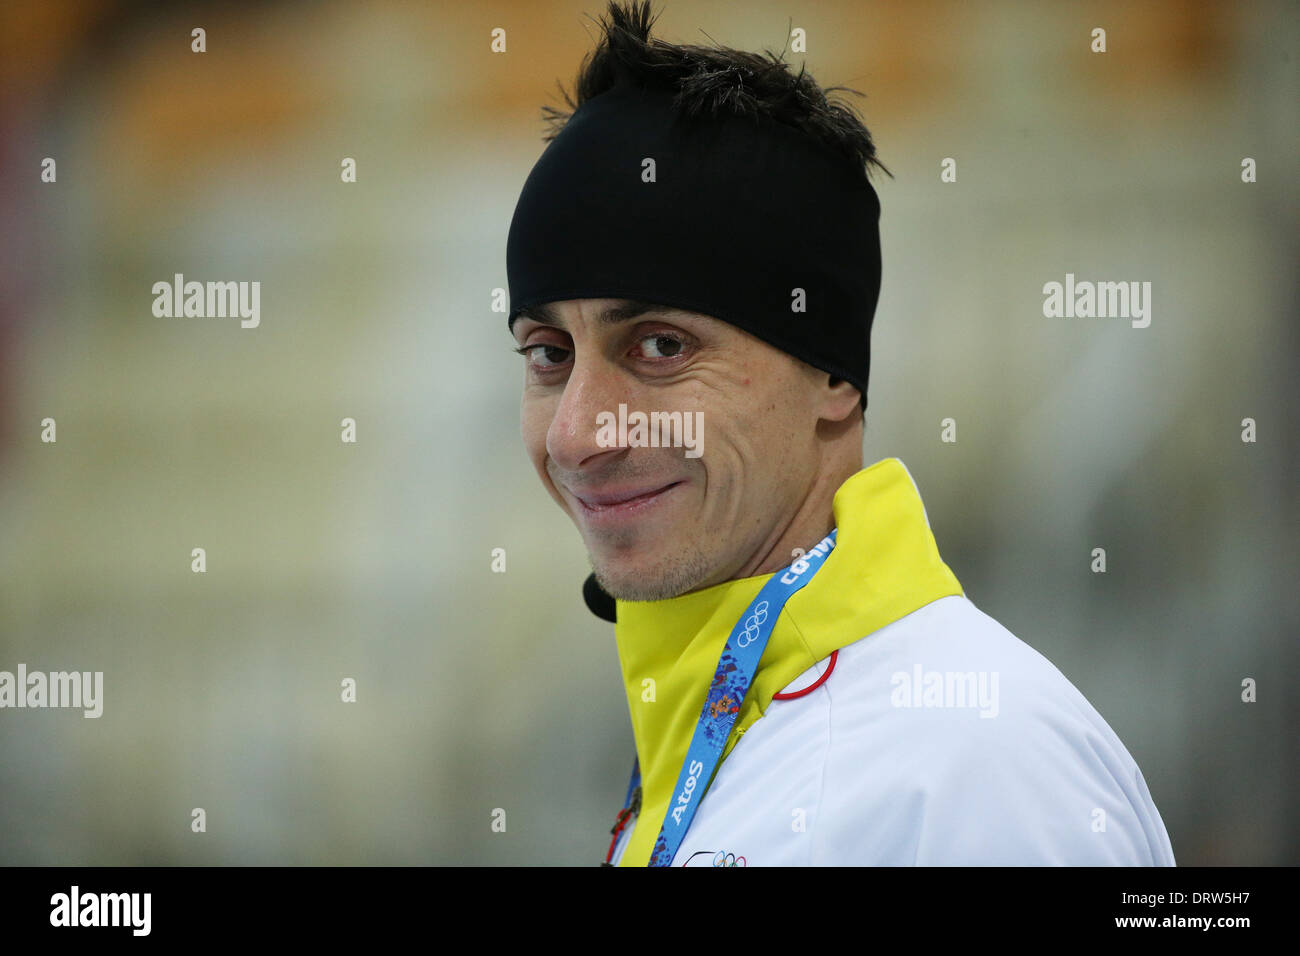 Sochi, Russia. 01st Feb, 2014. Robert Lehmann of Germany smiles during a speed skating training session at the Adler Arena Skating Center in Sochi, Russia, 01 February 2014. The Olympic Winter Games 2014 in Sochi run from 07 to 23 February 2014. Photo: Christian Charisius/dpa/Alamy Live News Stock Photo